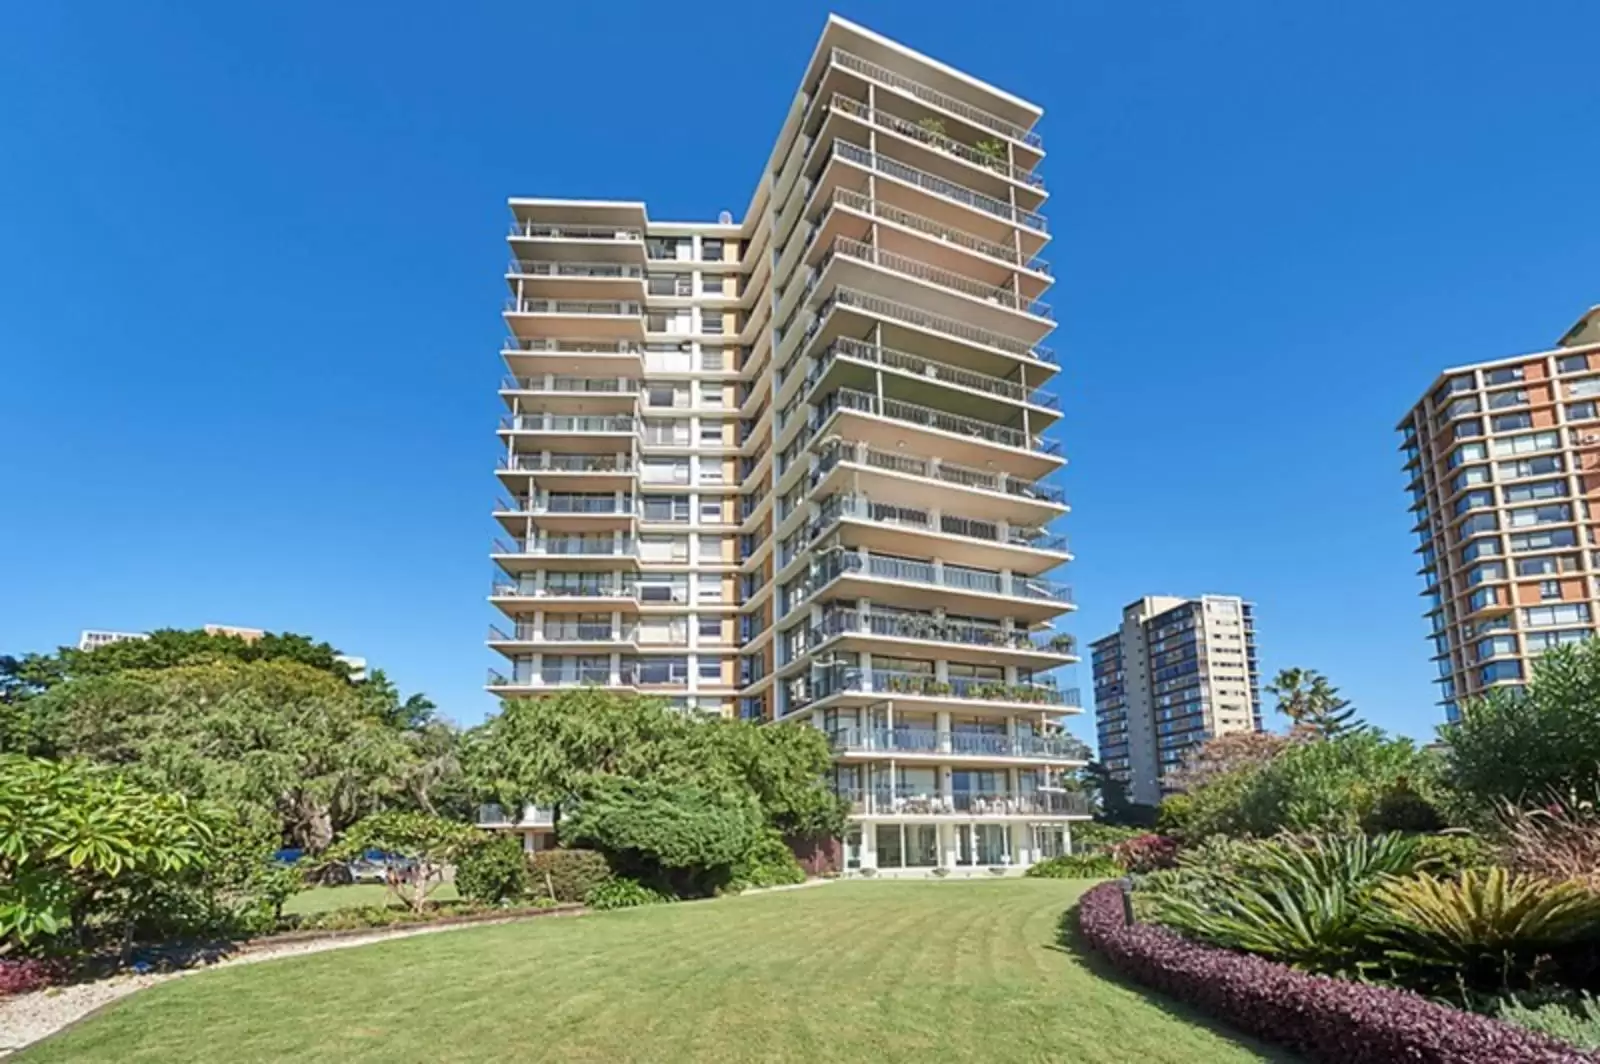 Photo #8: 15A & 15C/13-15 Thornton Street, Darling Point - Sold by Sydney Sotheby's International Realty